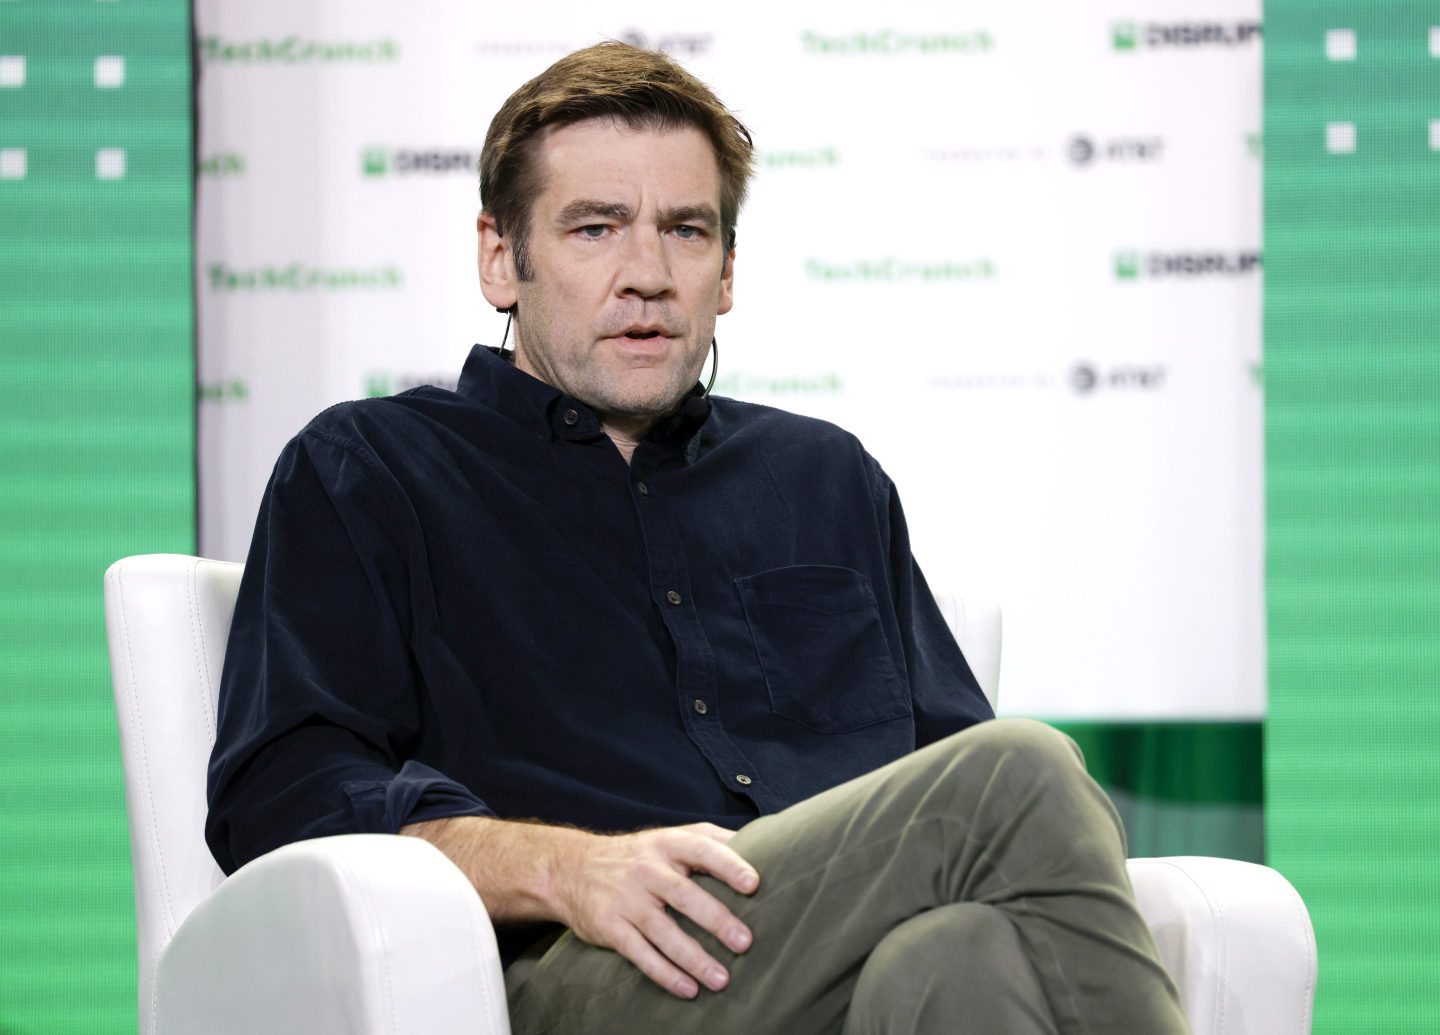 SAN FRANCISCO, CALIFORNIA - OCTOBER 18: Founder &amp; Managing Partner of a16z crypto Chris Dixon speaks onstage during TechCrunch Disrupt 2022 on October 18, 2022 in San Francisco, California. (Photo by Kimberly White/Getty Images for TechCrunch)